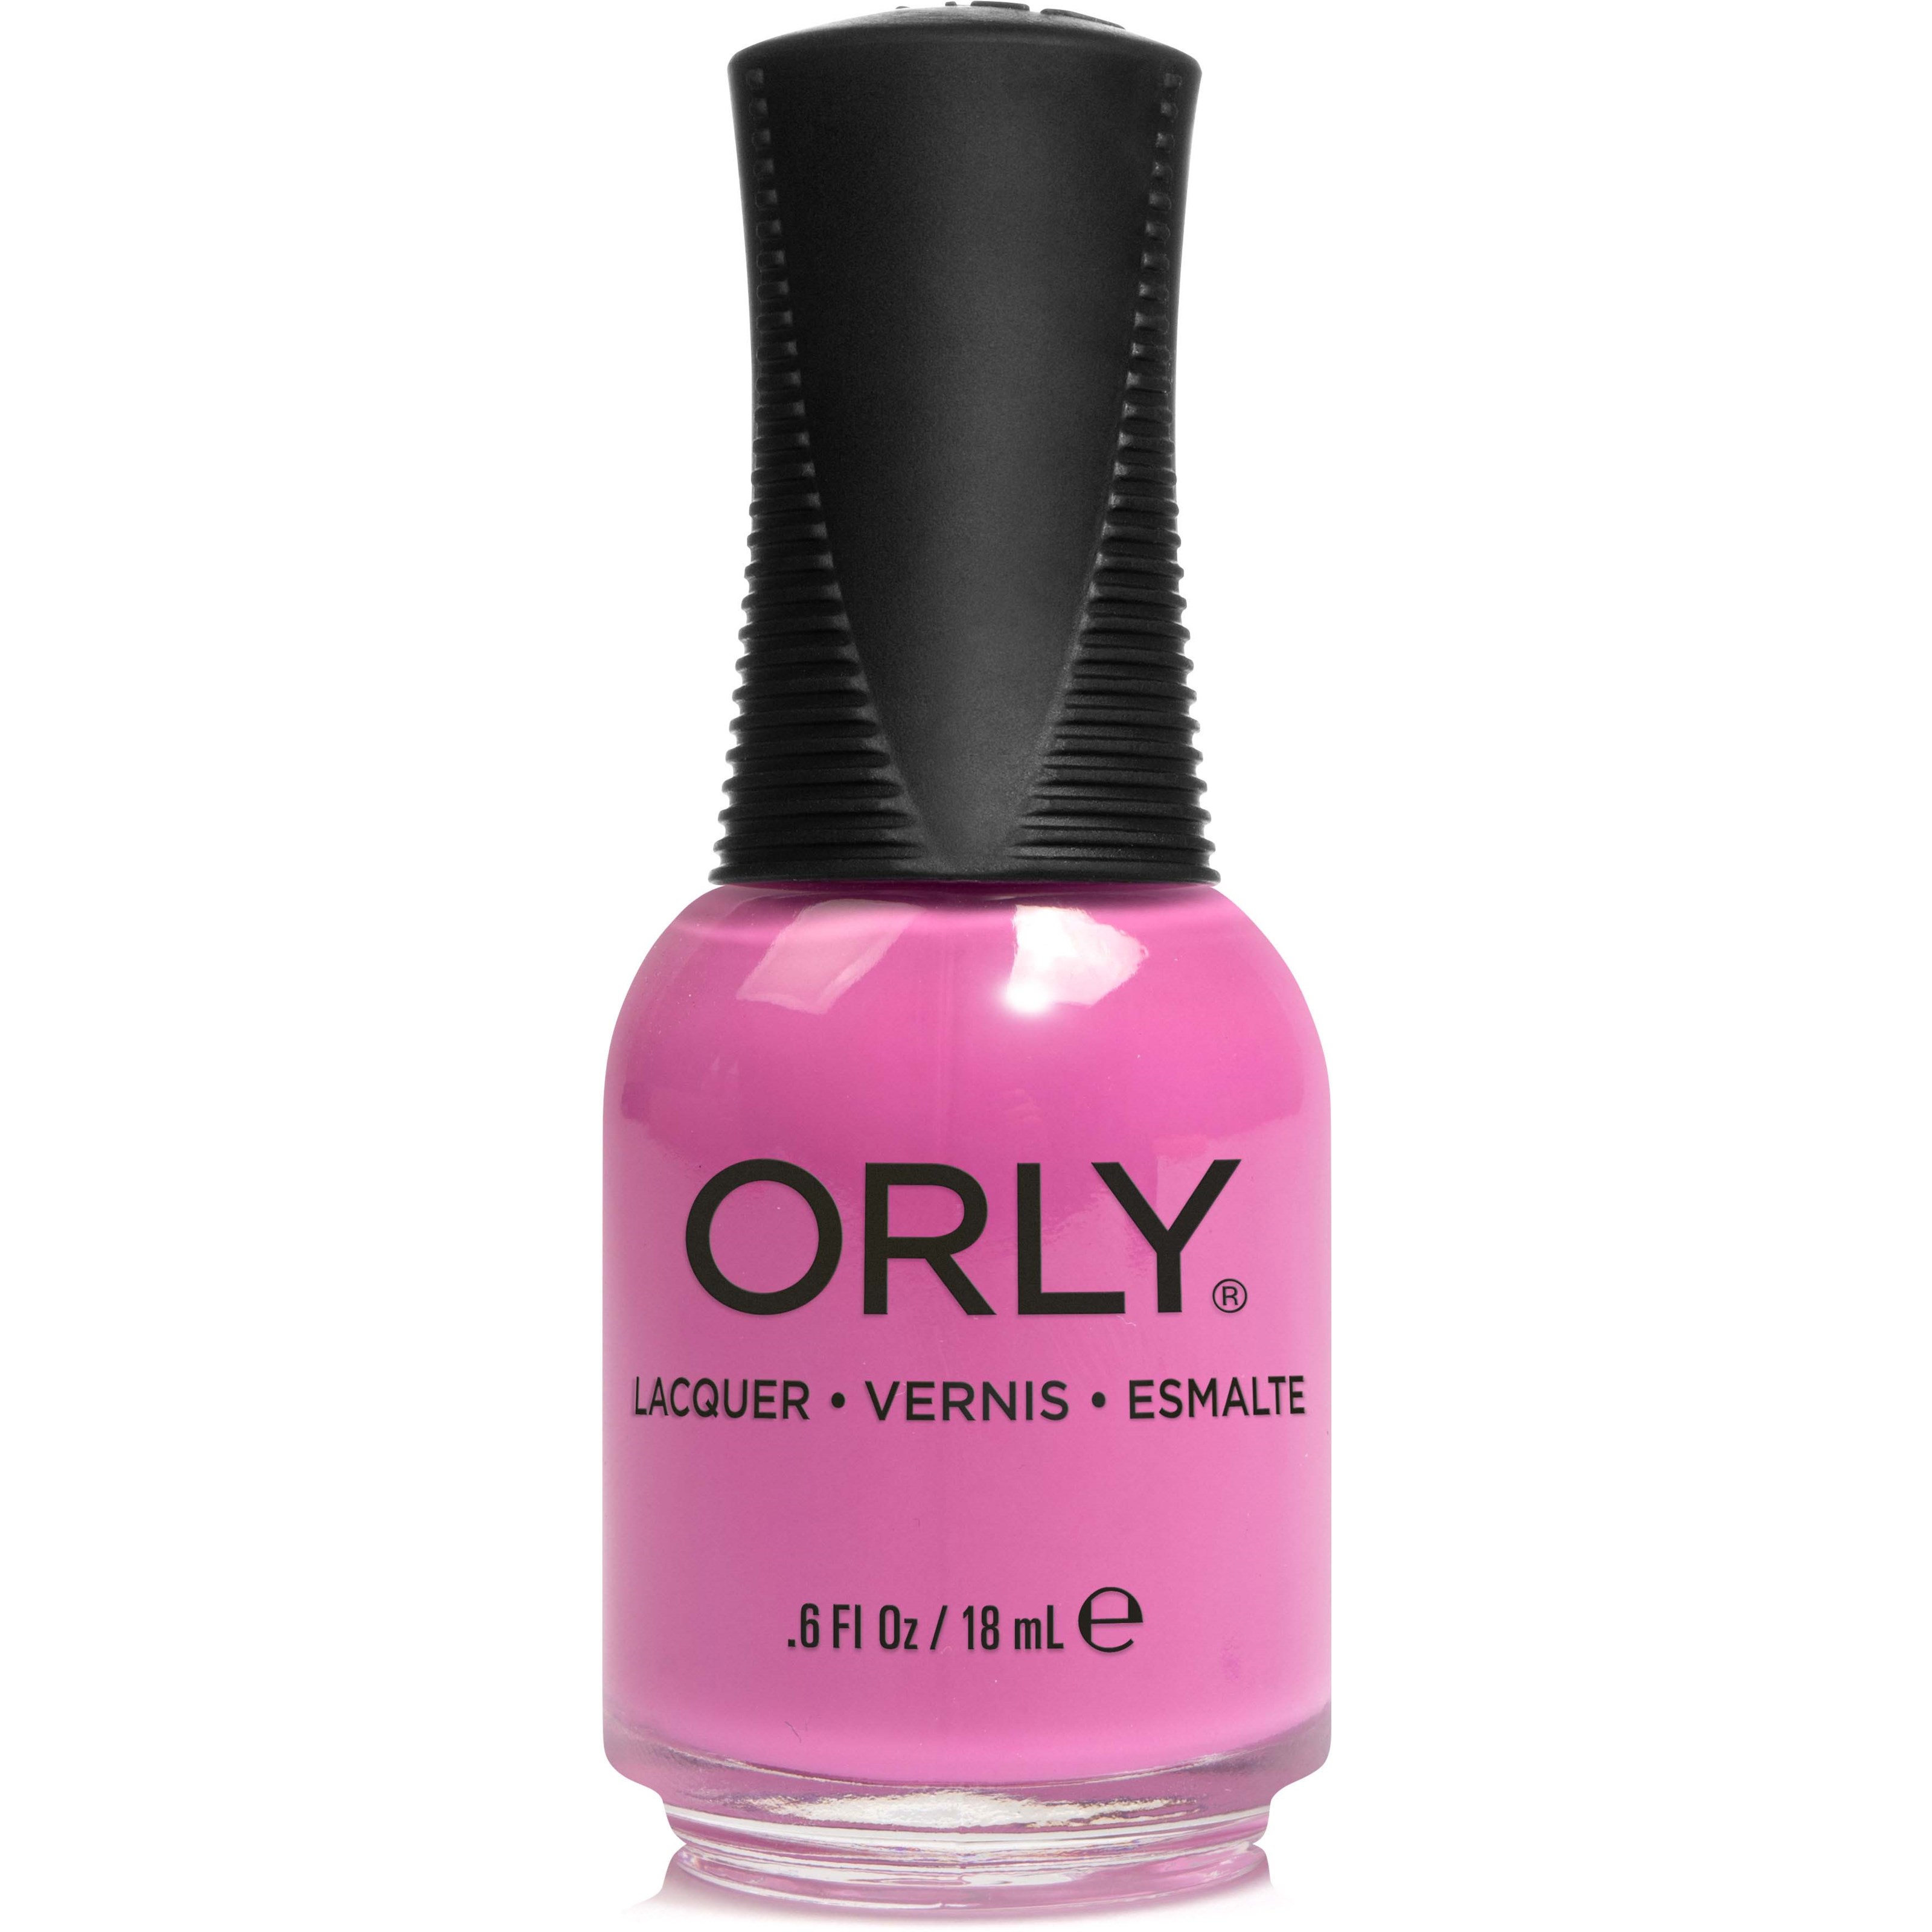 ORLY Lacquer Check Yes or No